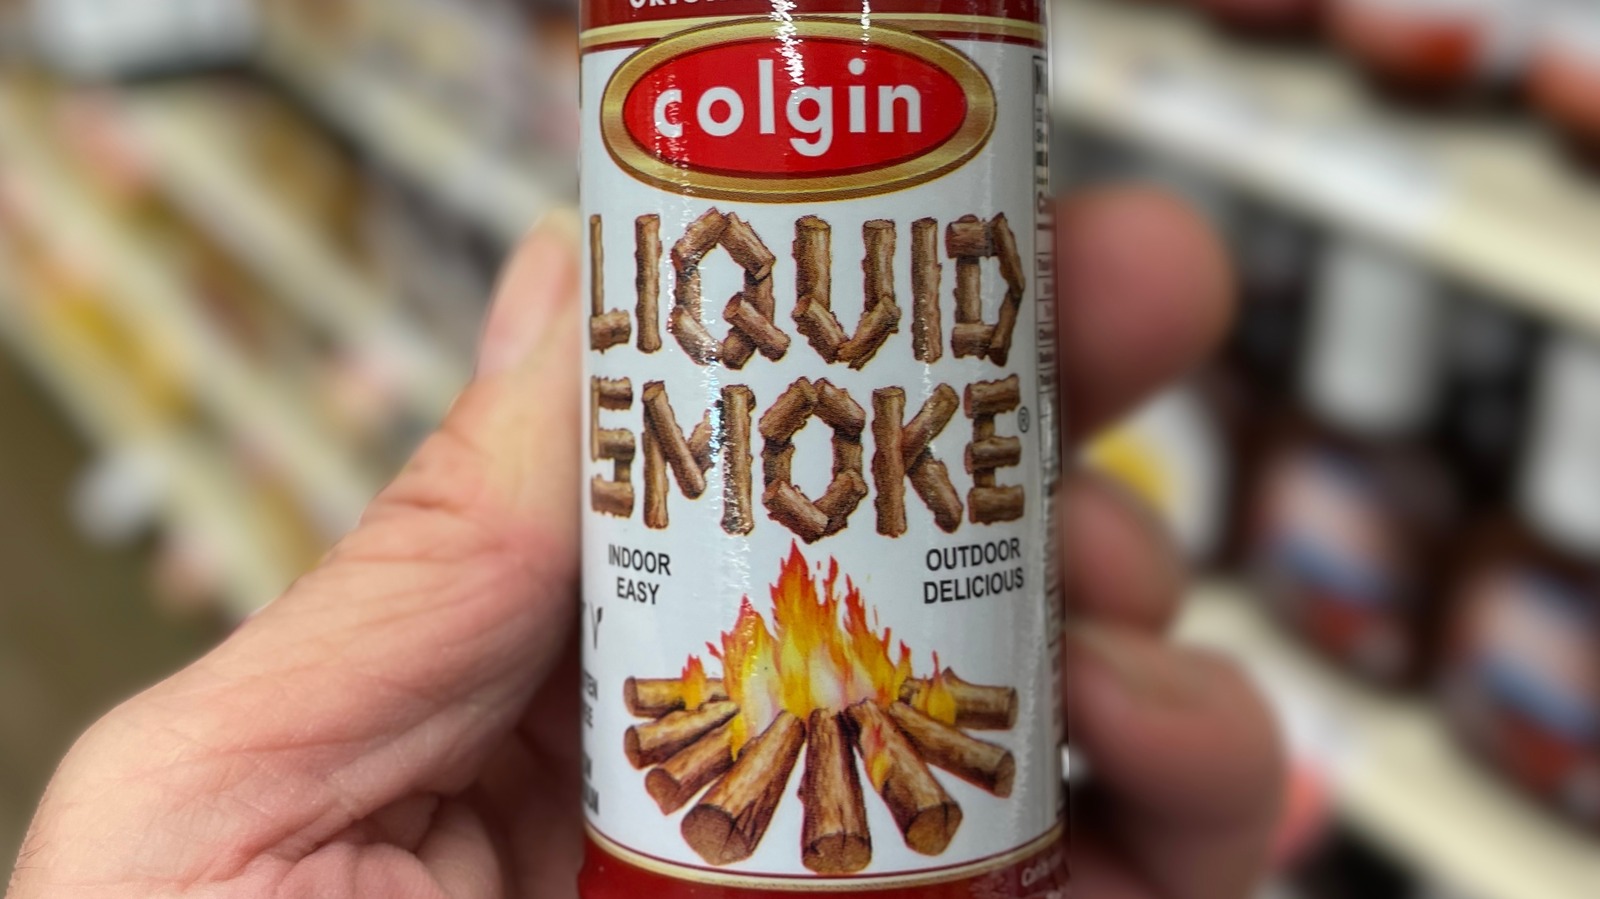 Liquid Smoke: The History Behind a Divisive Culinary Shortcut - Eater